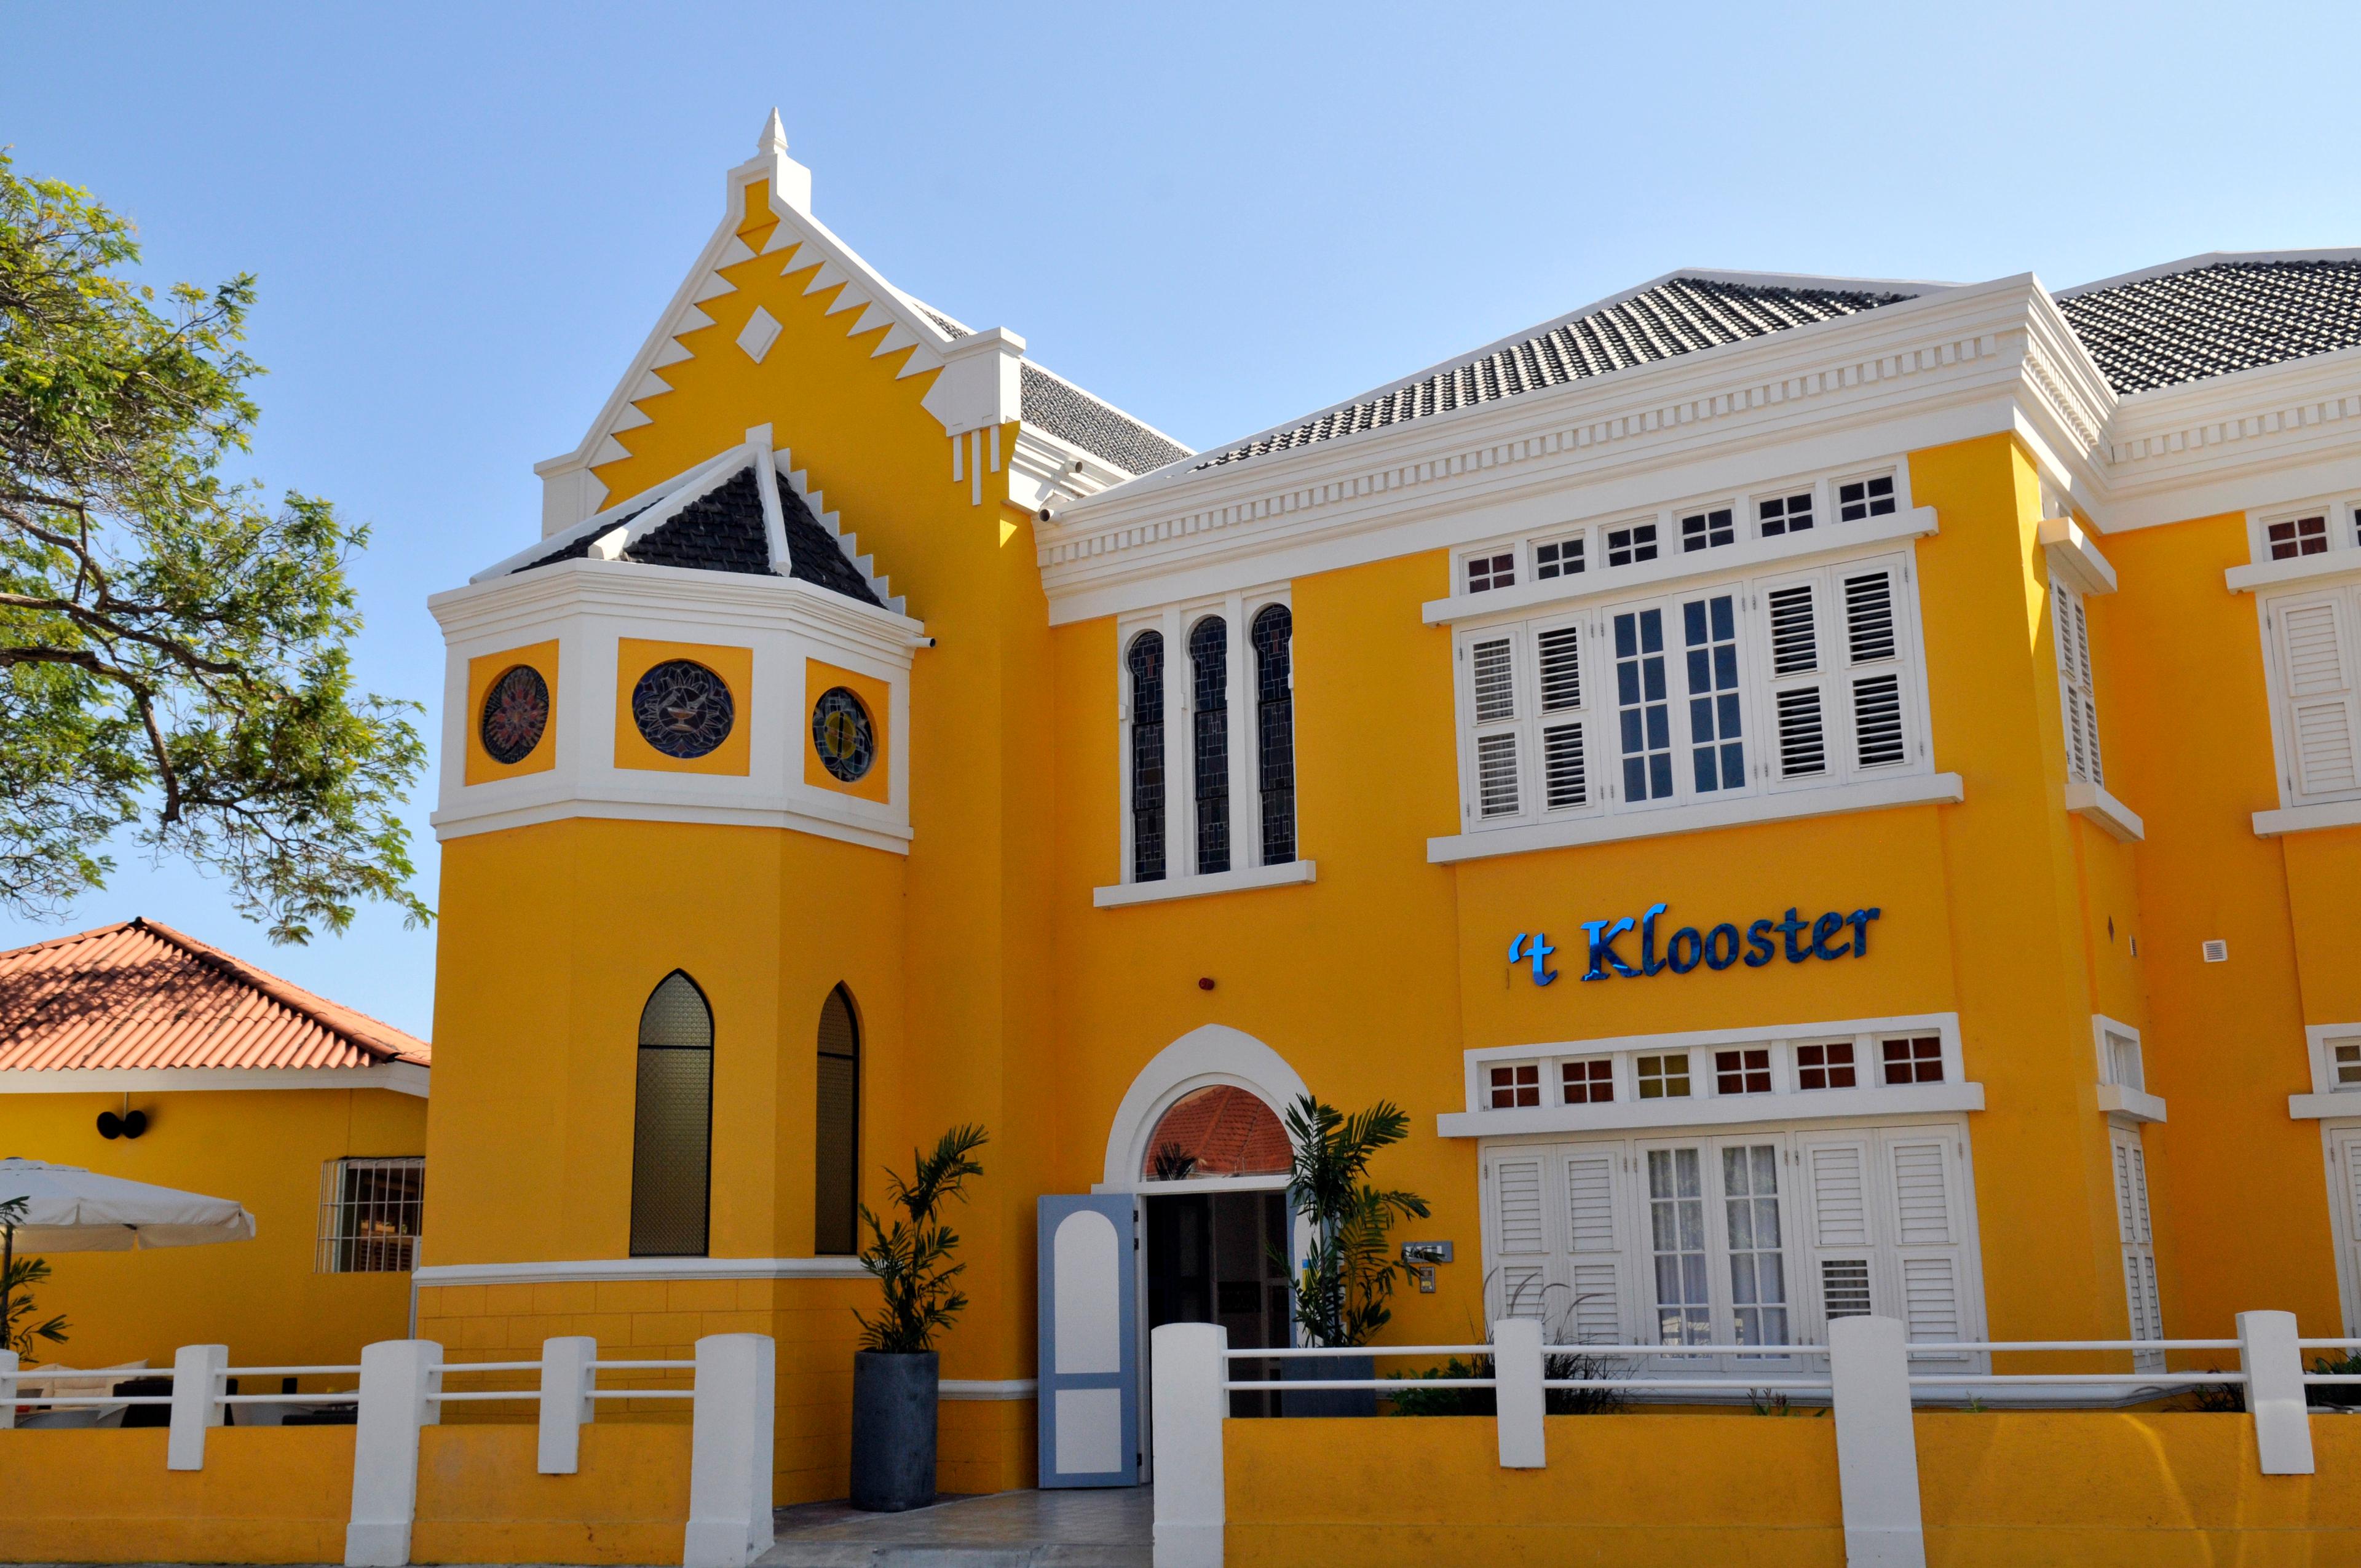 Hotel T Klooster-Willemstad in Willemstad, Curacao